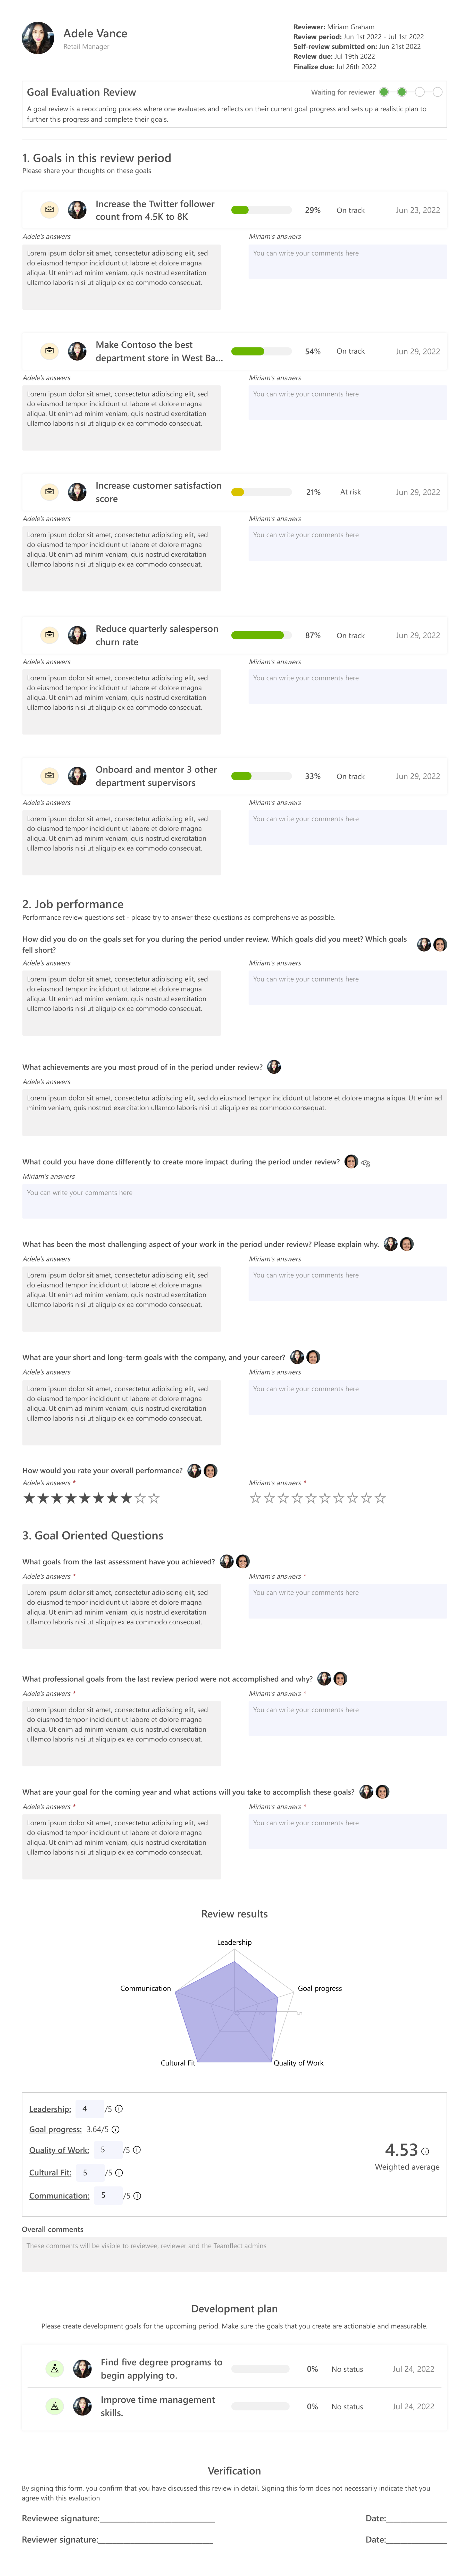 Teamflect goal evaluation review template in Microsoft Teams